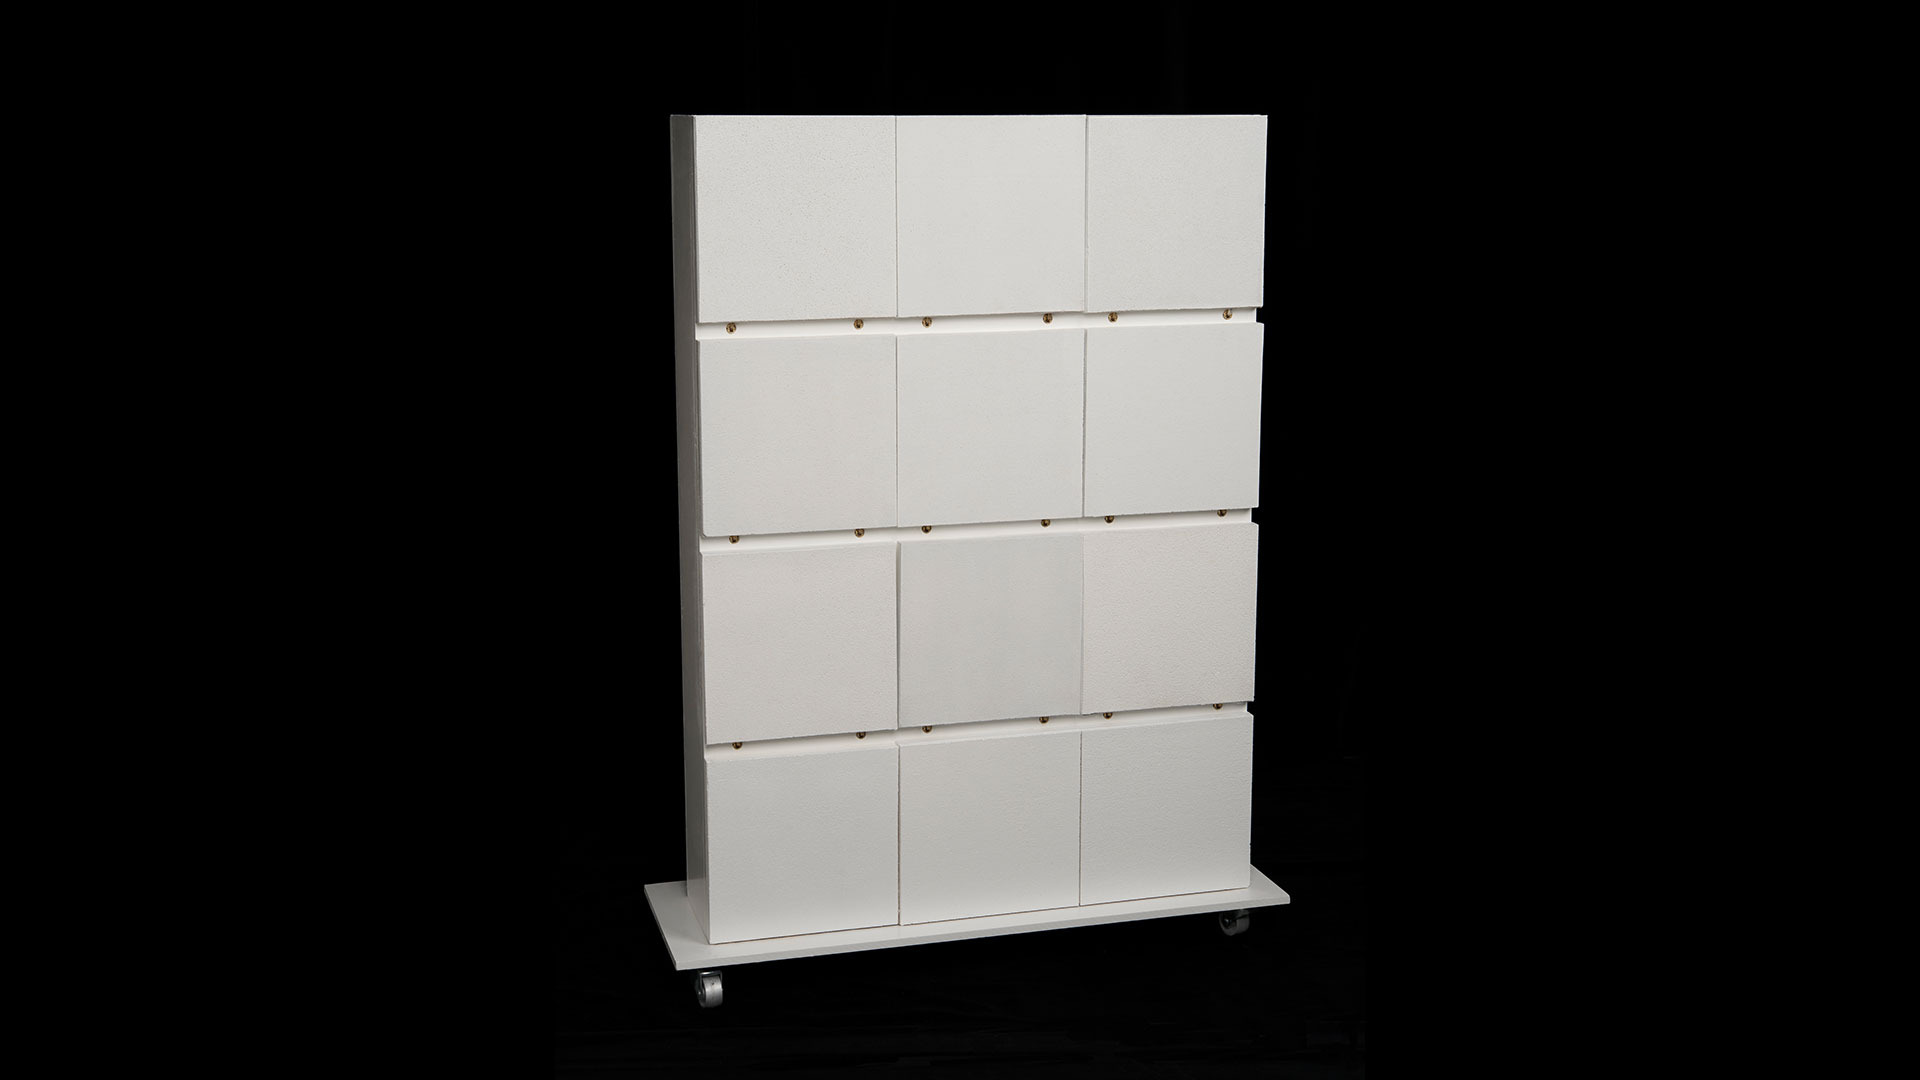 Standing wall of white squares, 3 squares wide and 4 squares tall, separated into distinct rows, all on top of a raised platform with wheels